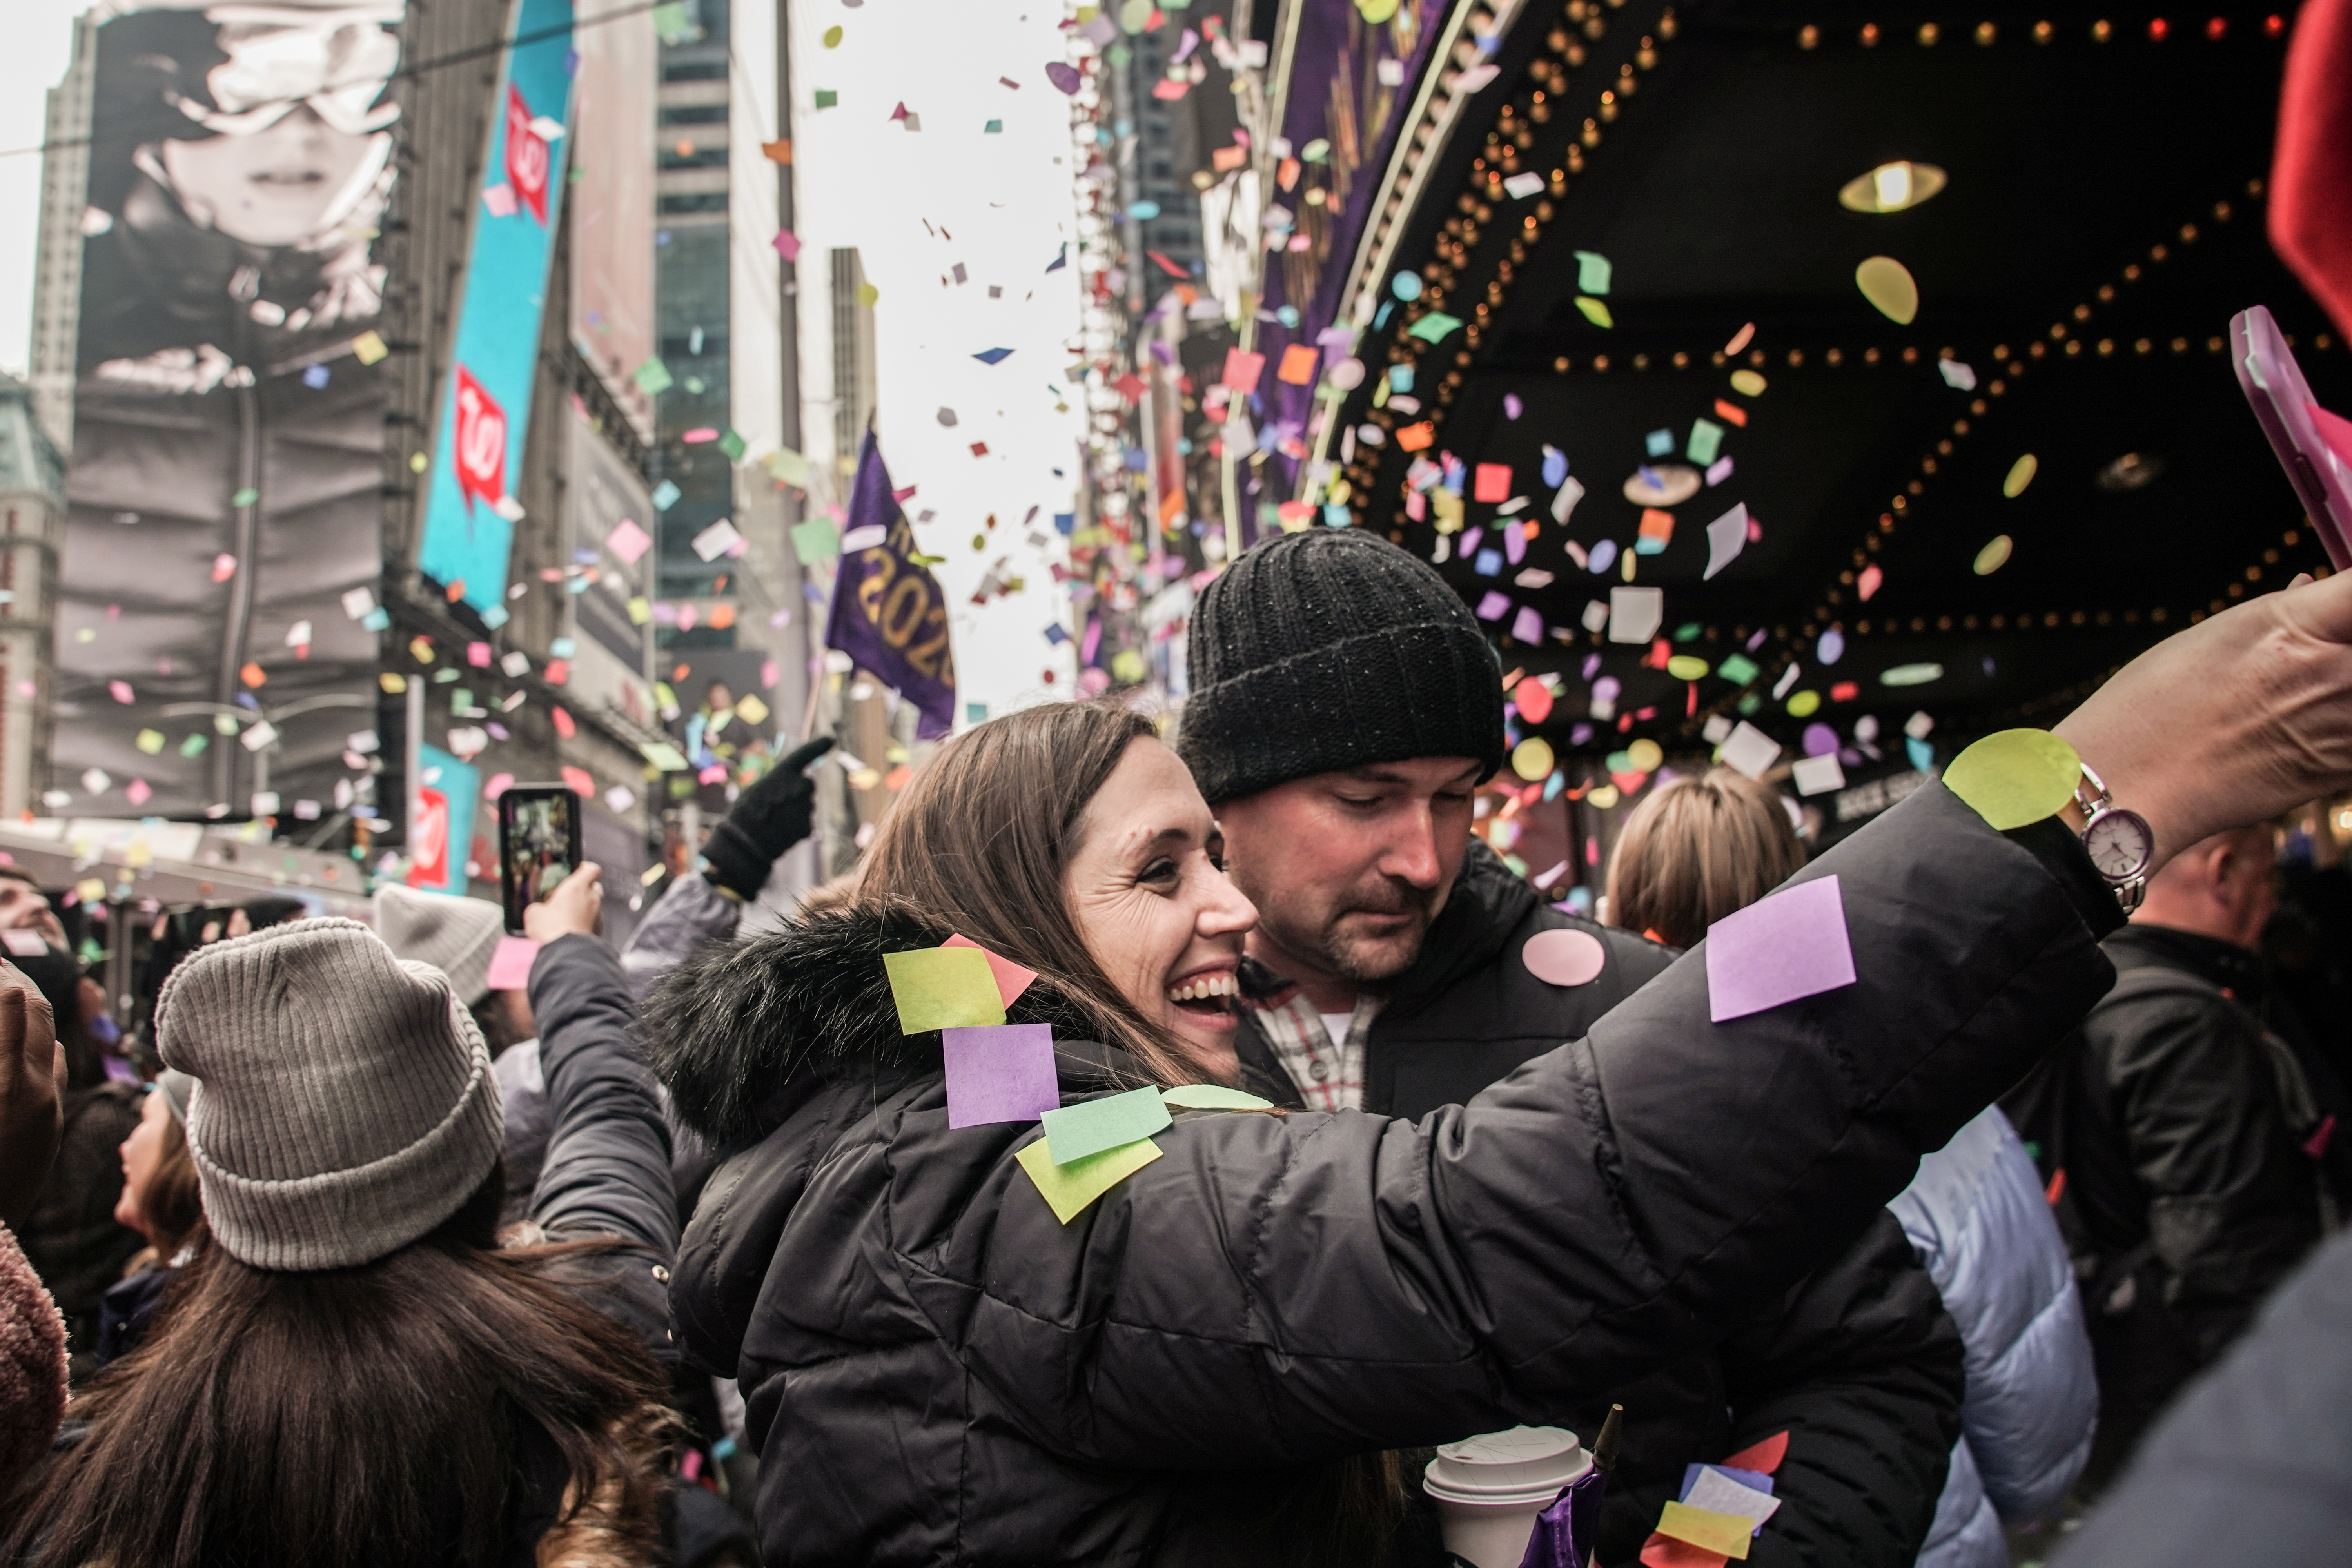 People take a picture at confetti as it's thrown from the Hard Rock Cafe marquee as part of the annual confetti test ahead of the New Year's Eve ball-drop celebrations in Times Square in New York City, New York, U.S., December 29, 2019. REUTERS/Jeenah Moon